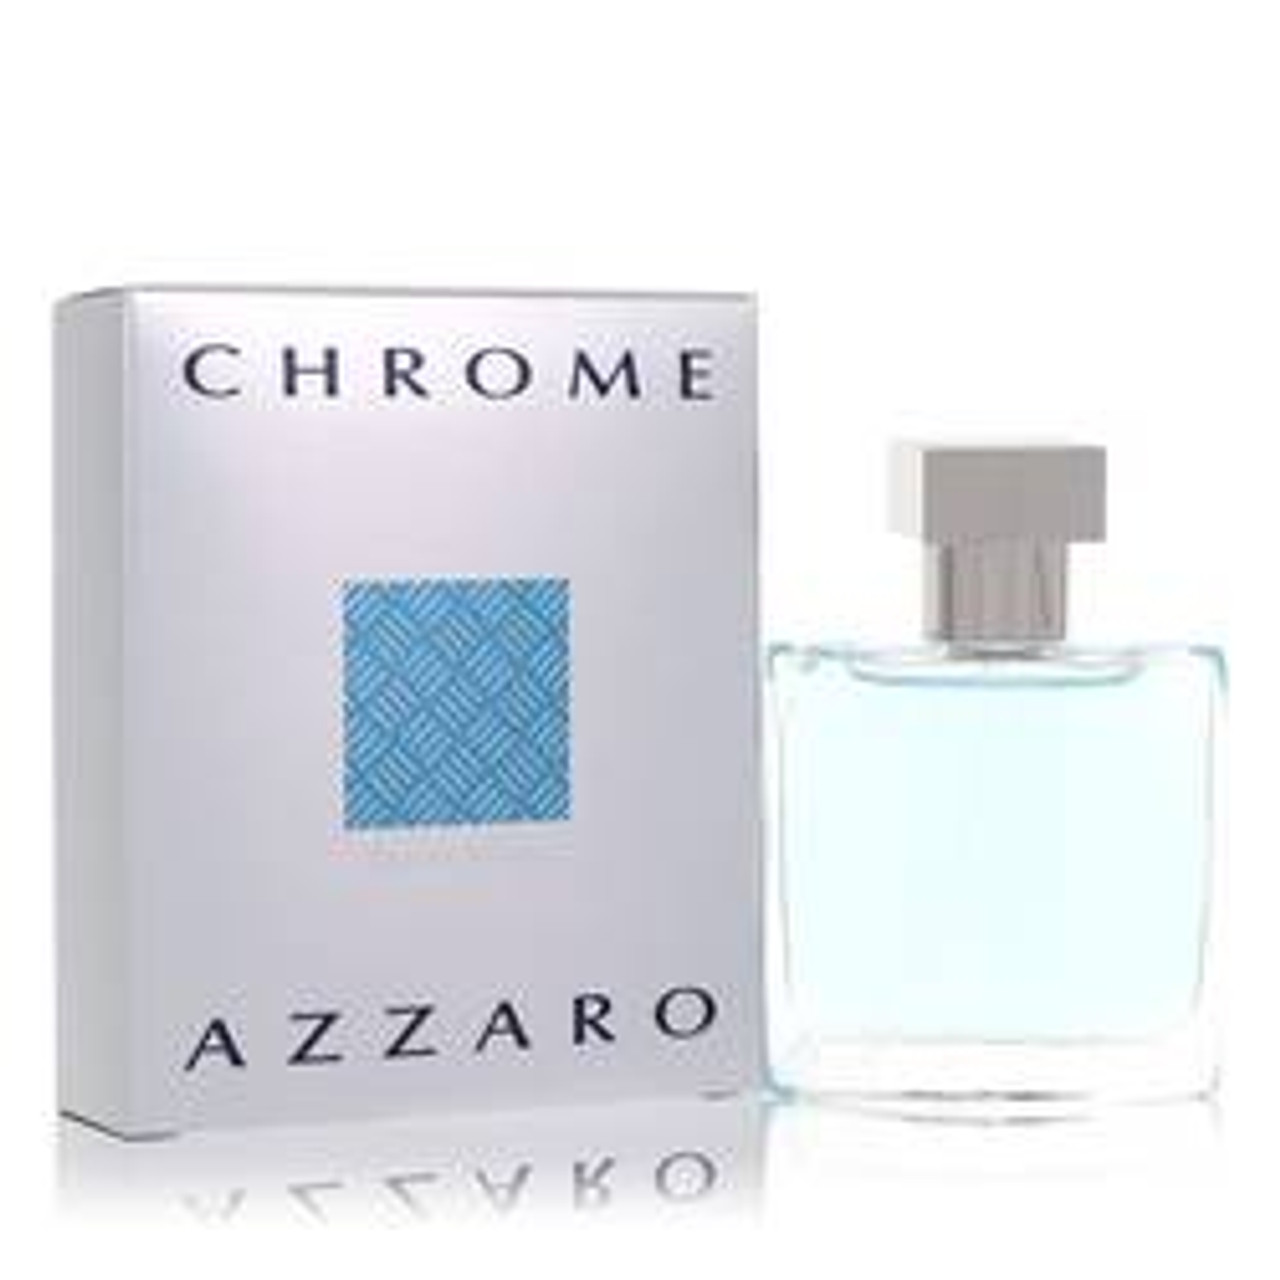 Chrome Cologne By Azzaro Eau De Toilette Spray 1 oz for Men - [From 88.00 - Choose pk Qty ] - *Ships from Miami